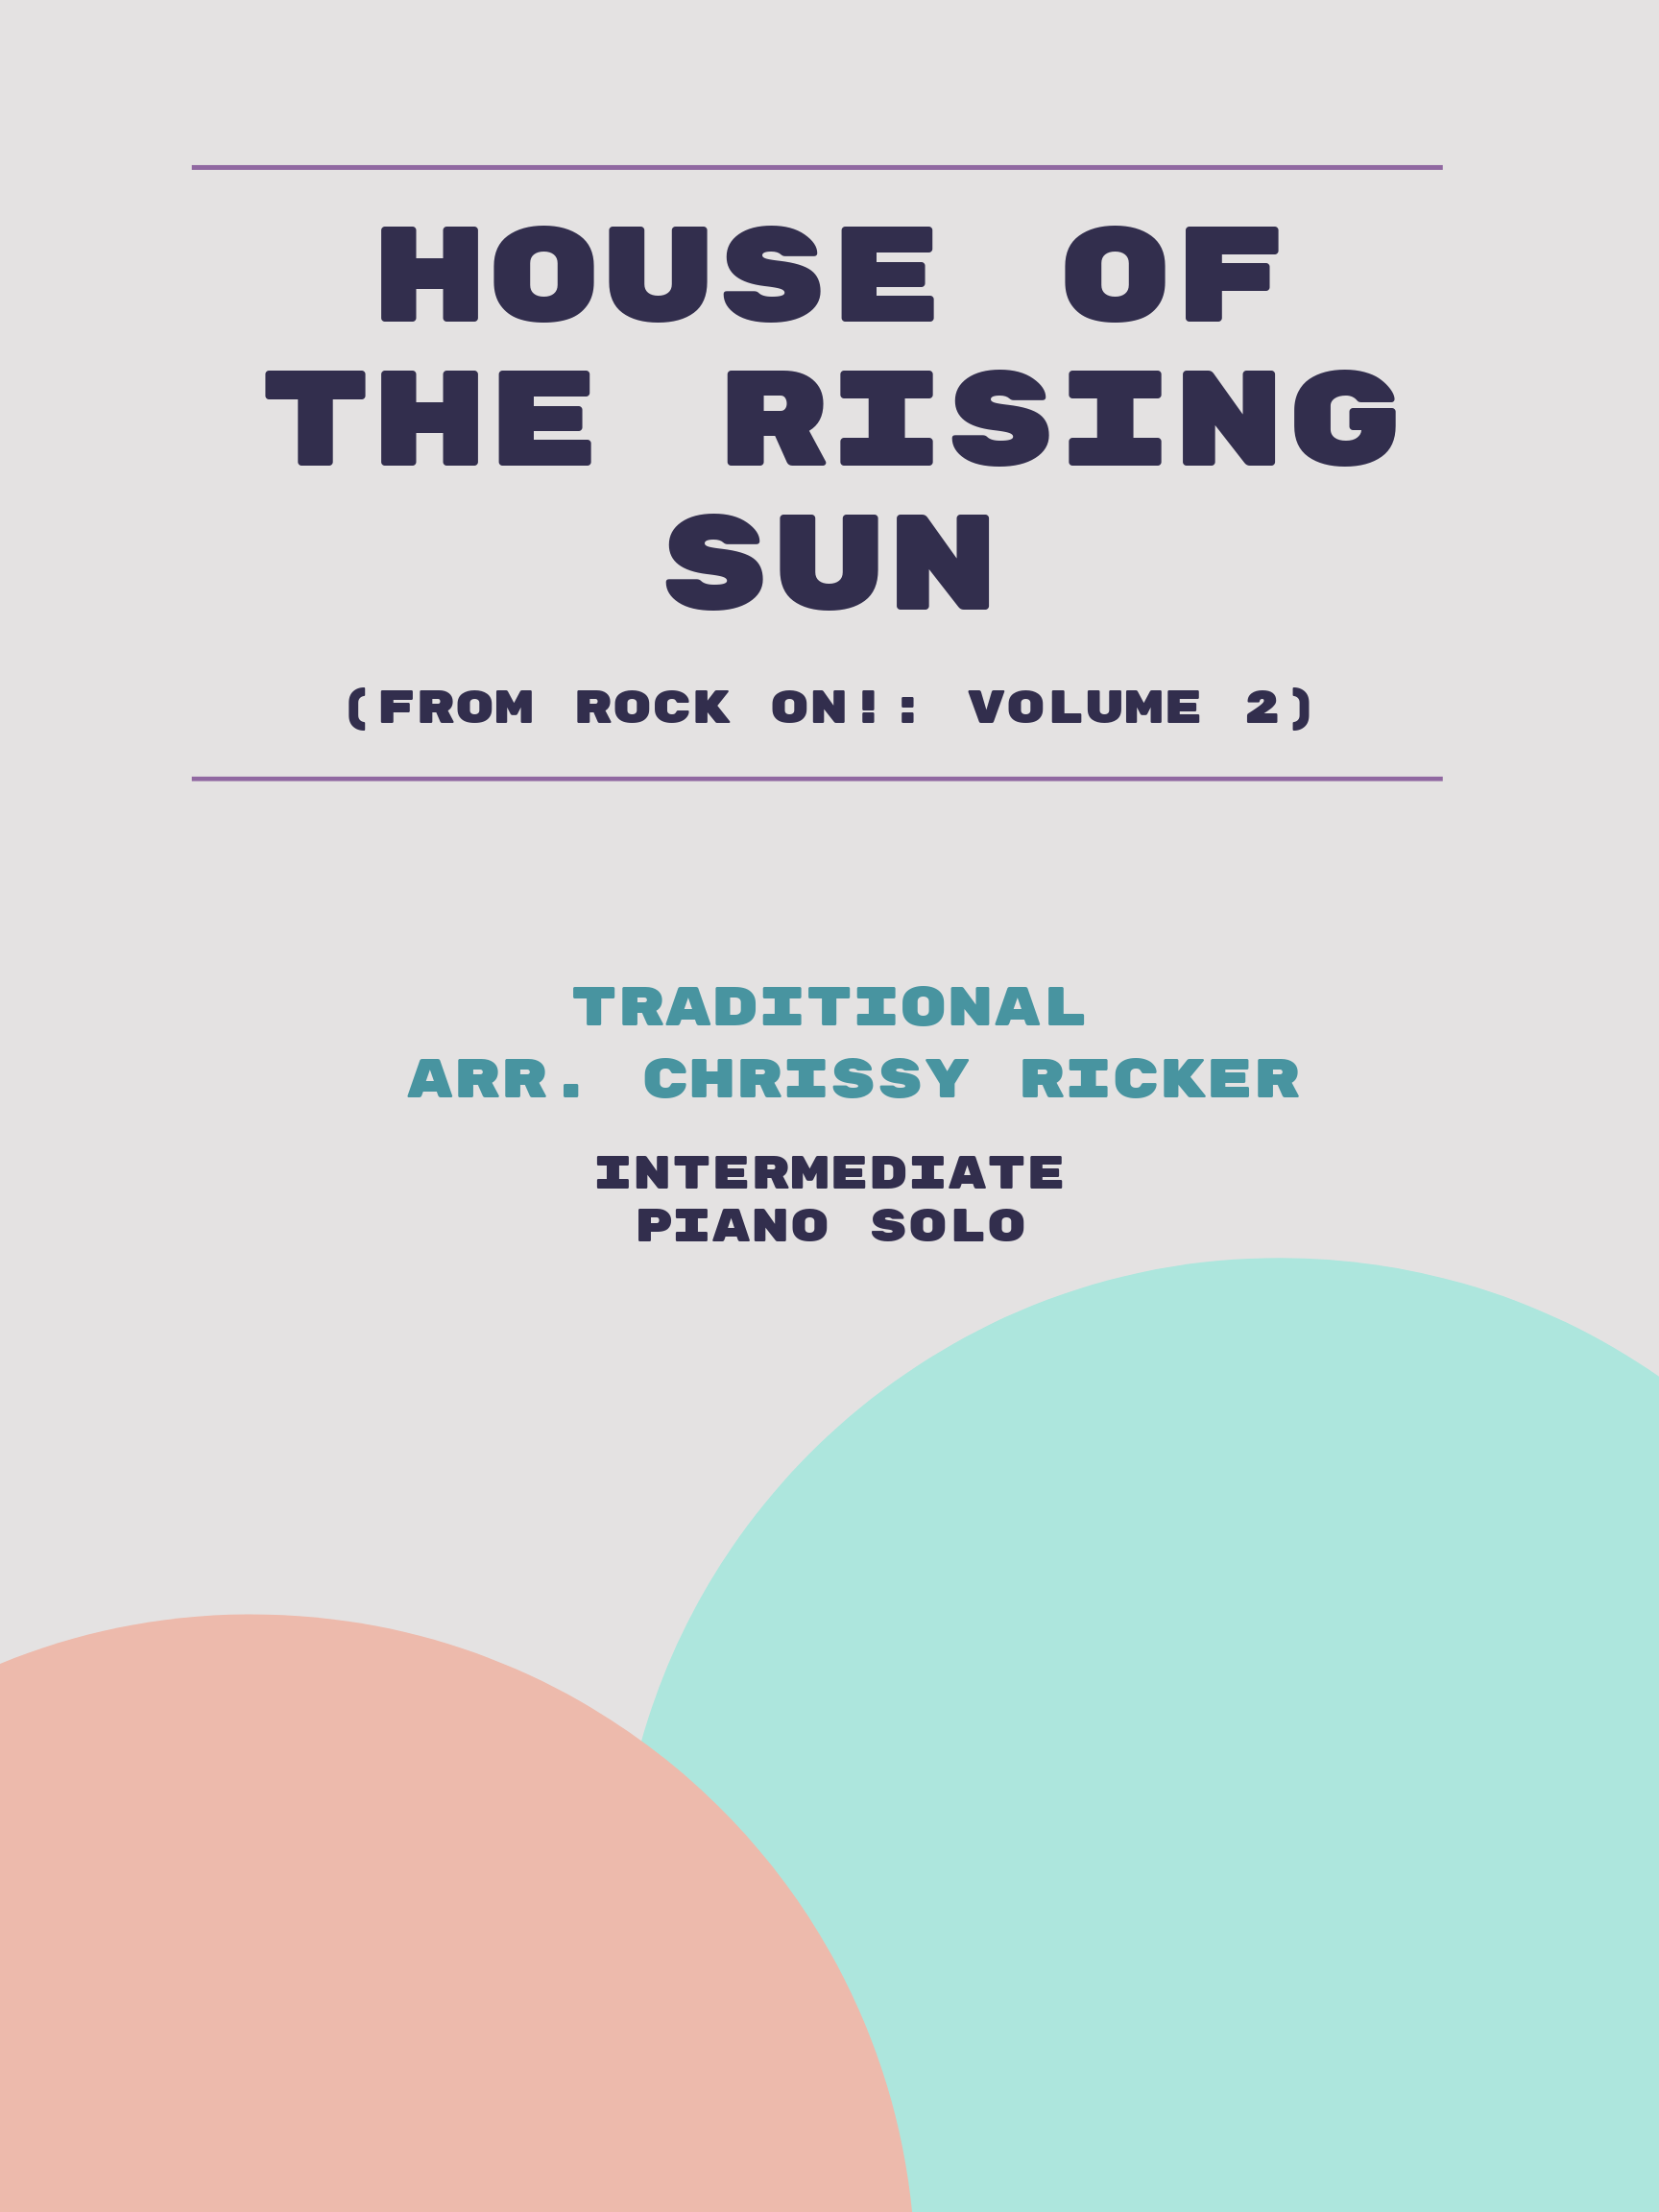 House of the Rising Sun by Traditional